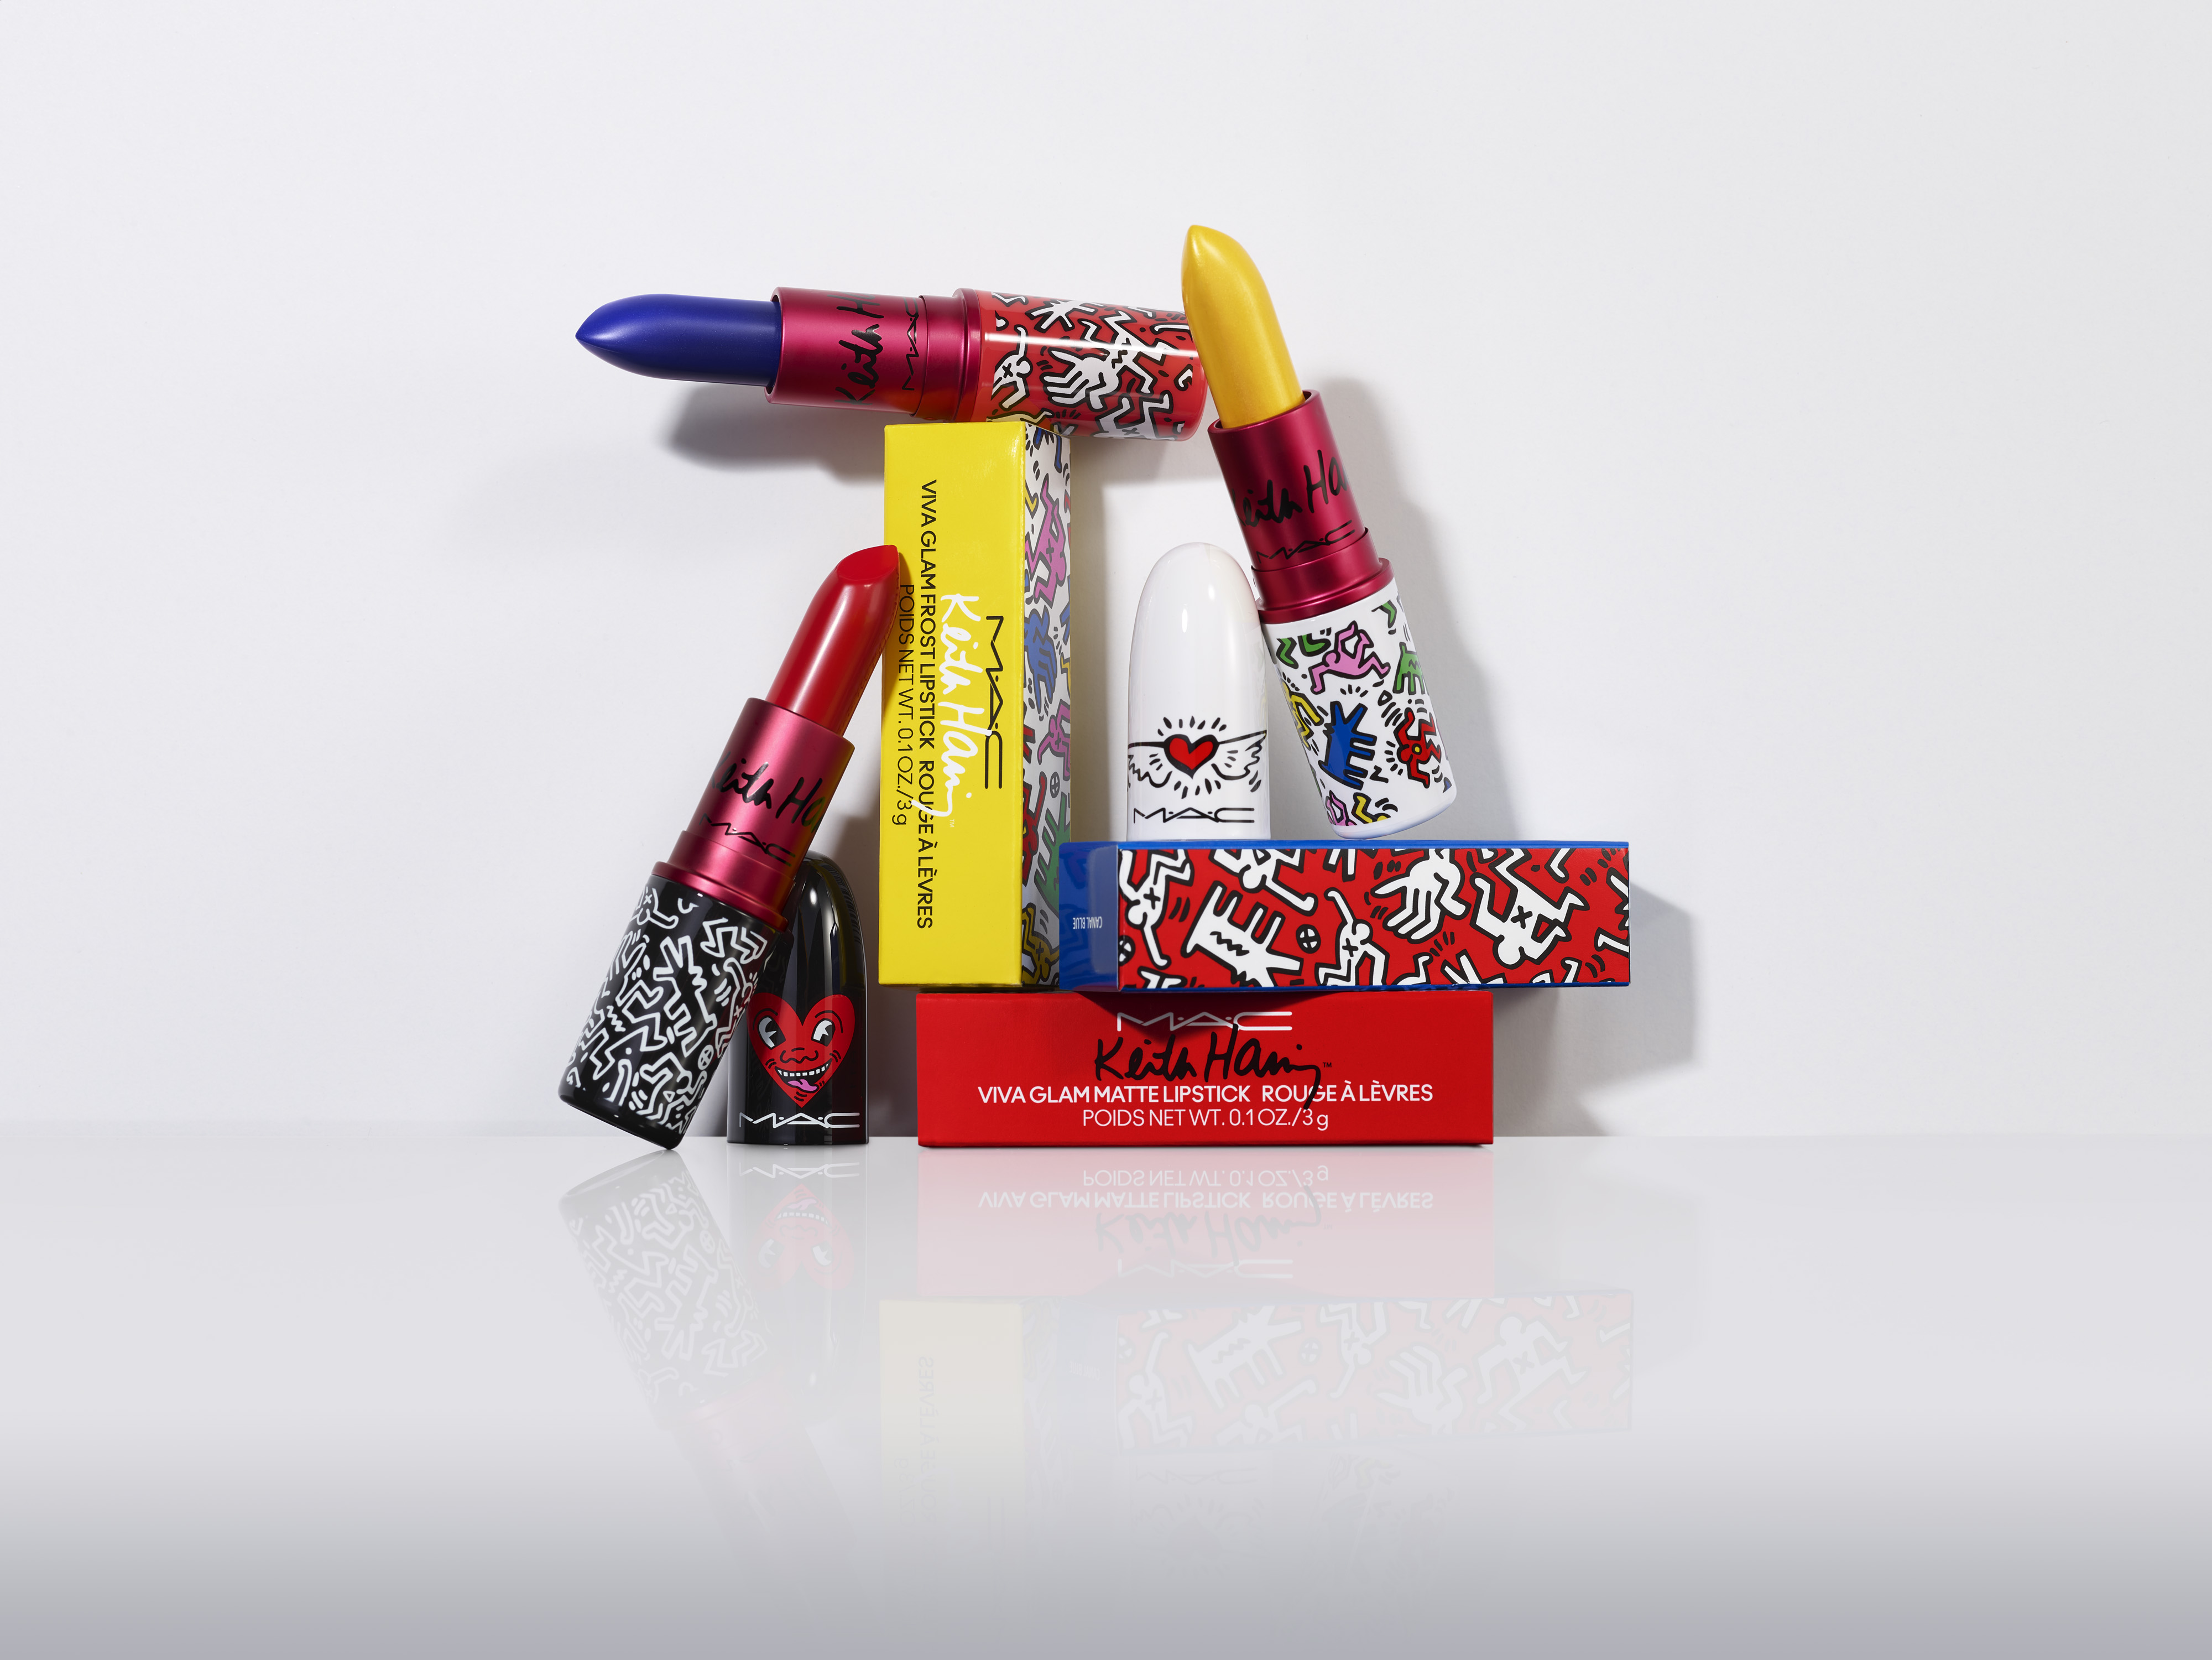 M•A•C VIVA GLAM X KEITH HARING